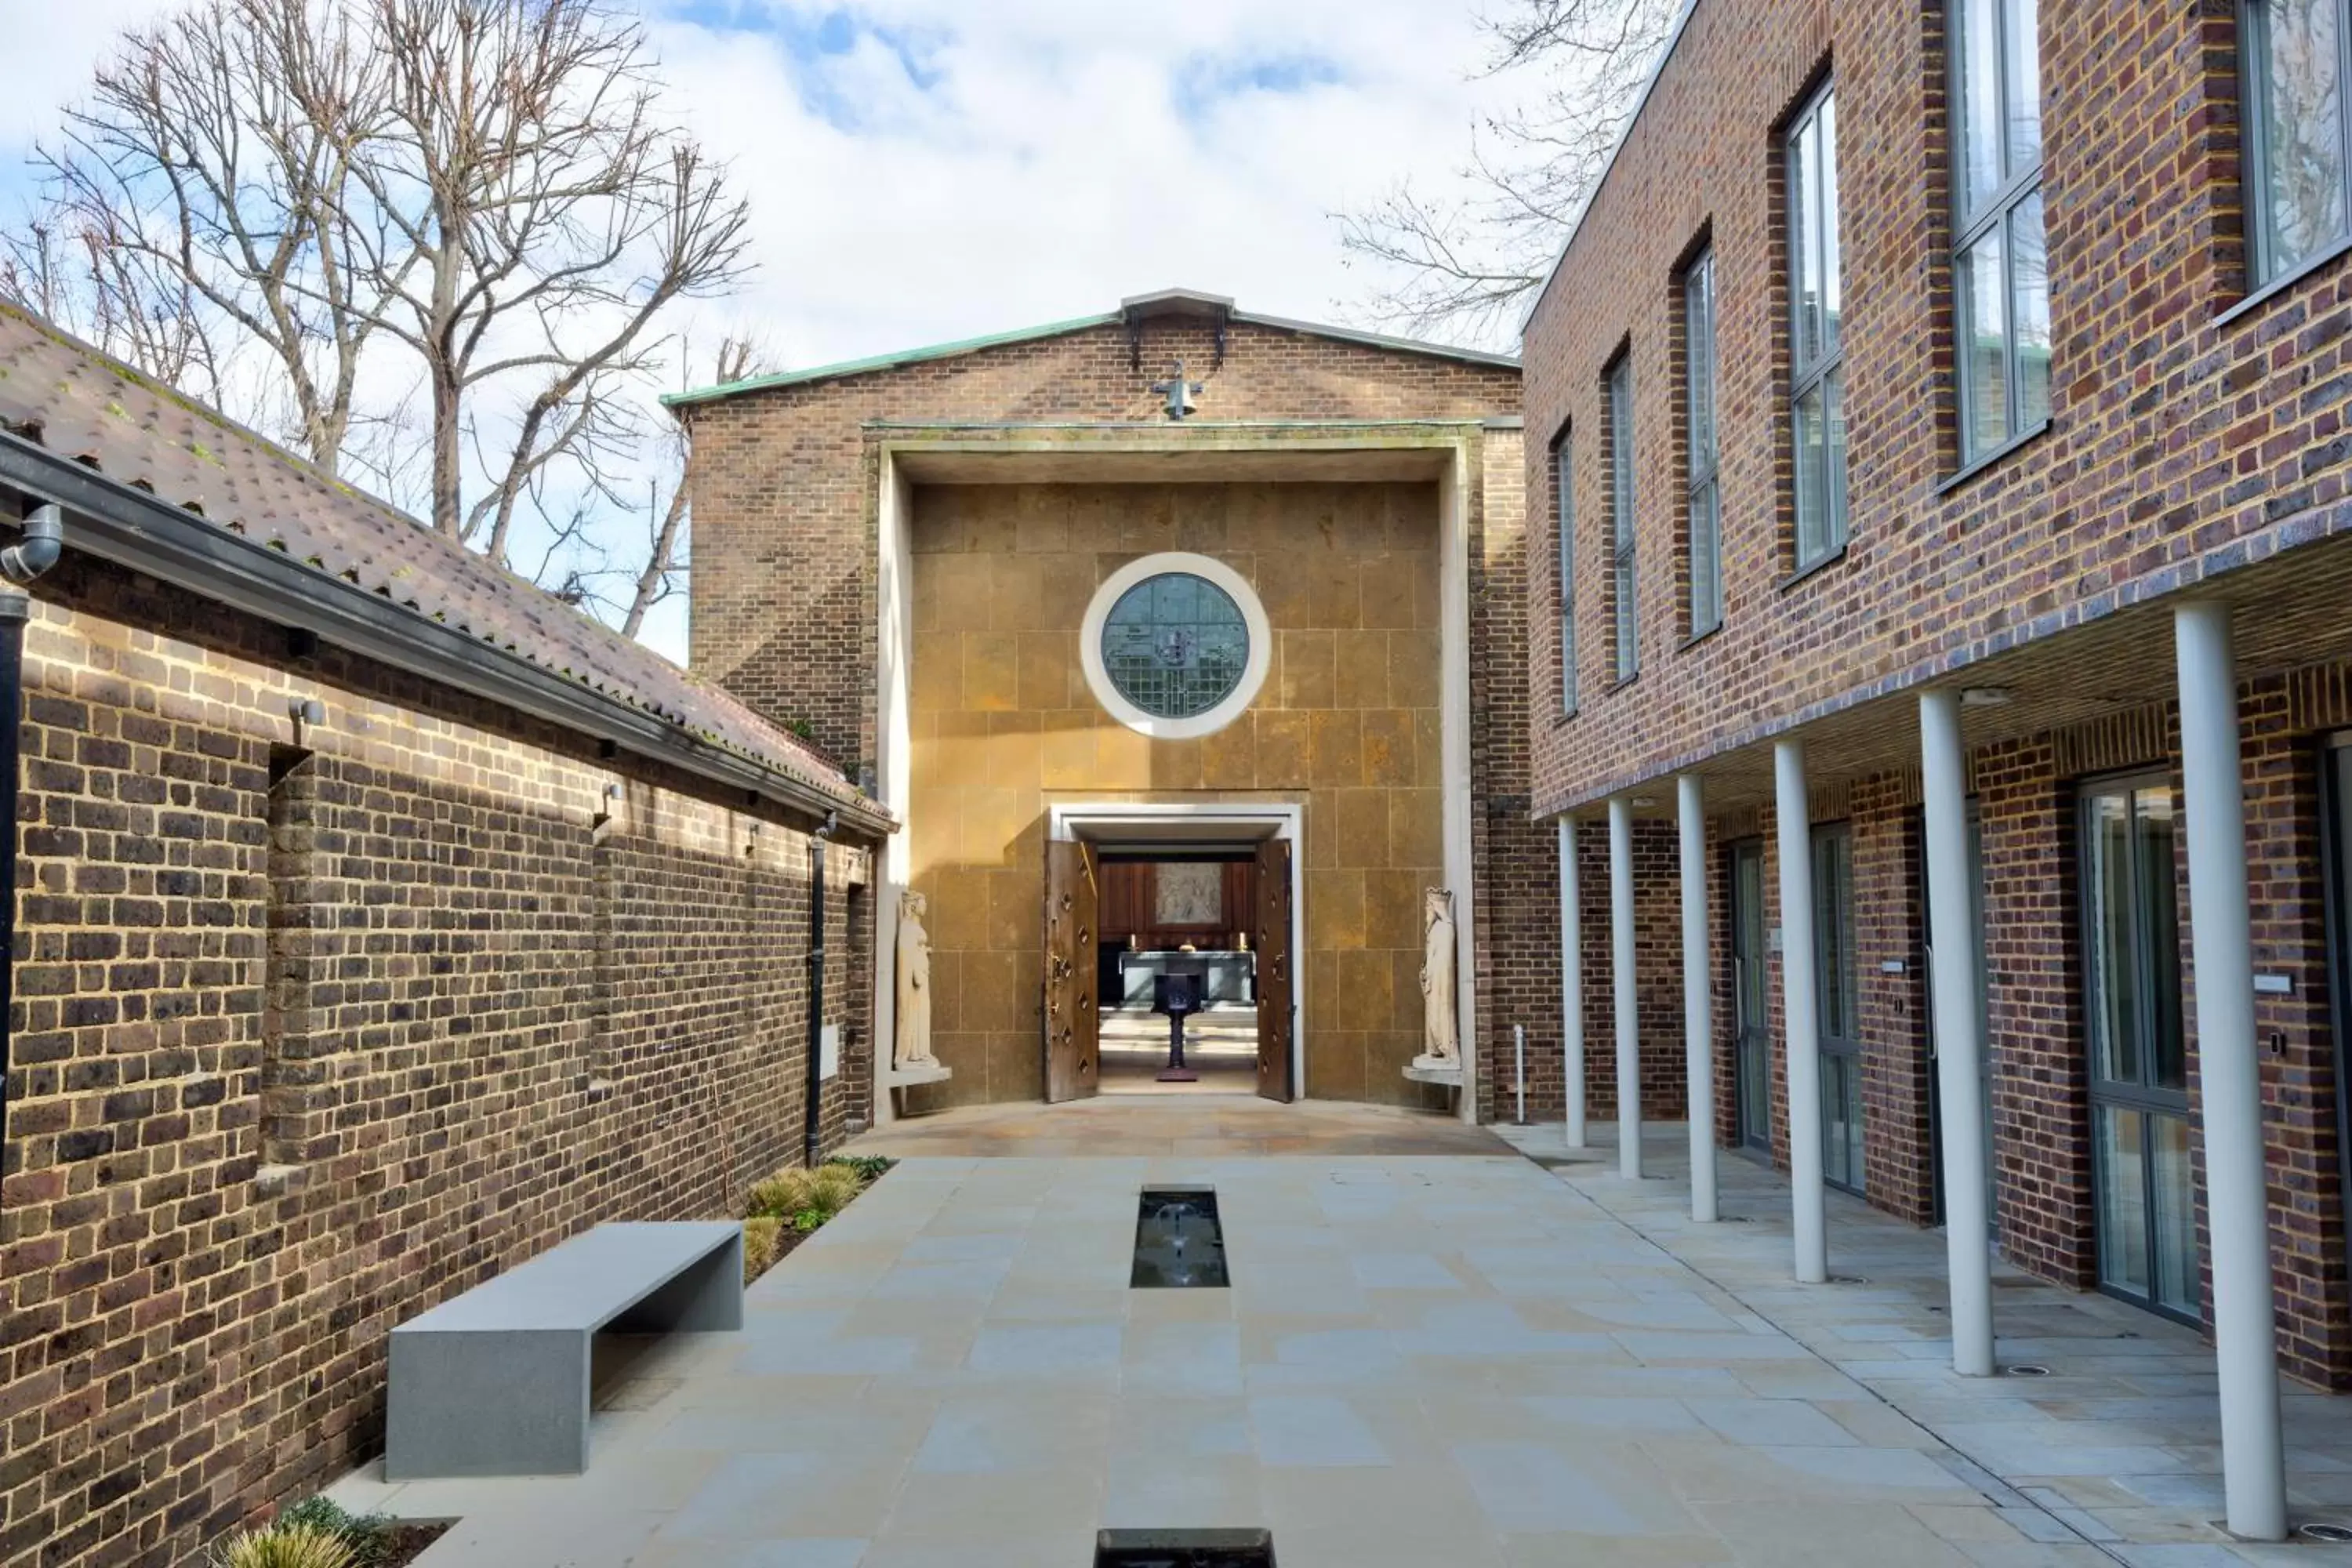 Inner courtyard view in The Royal Foundation of St Katharine